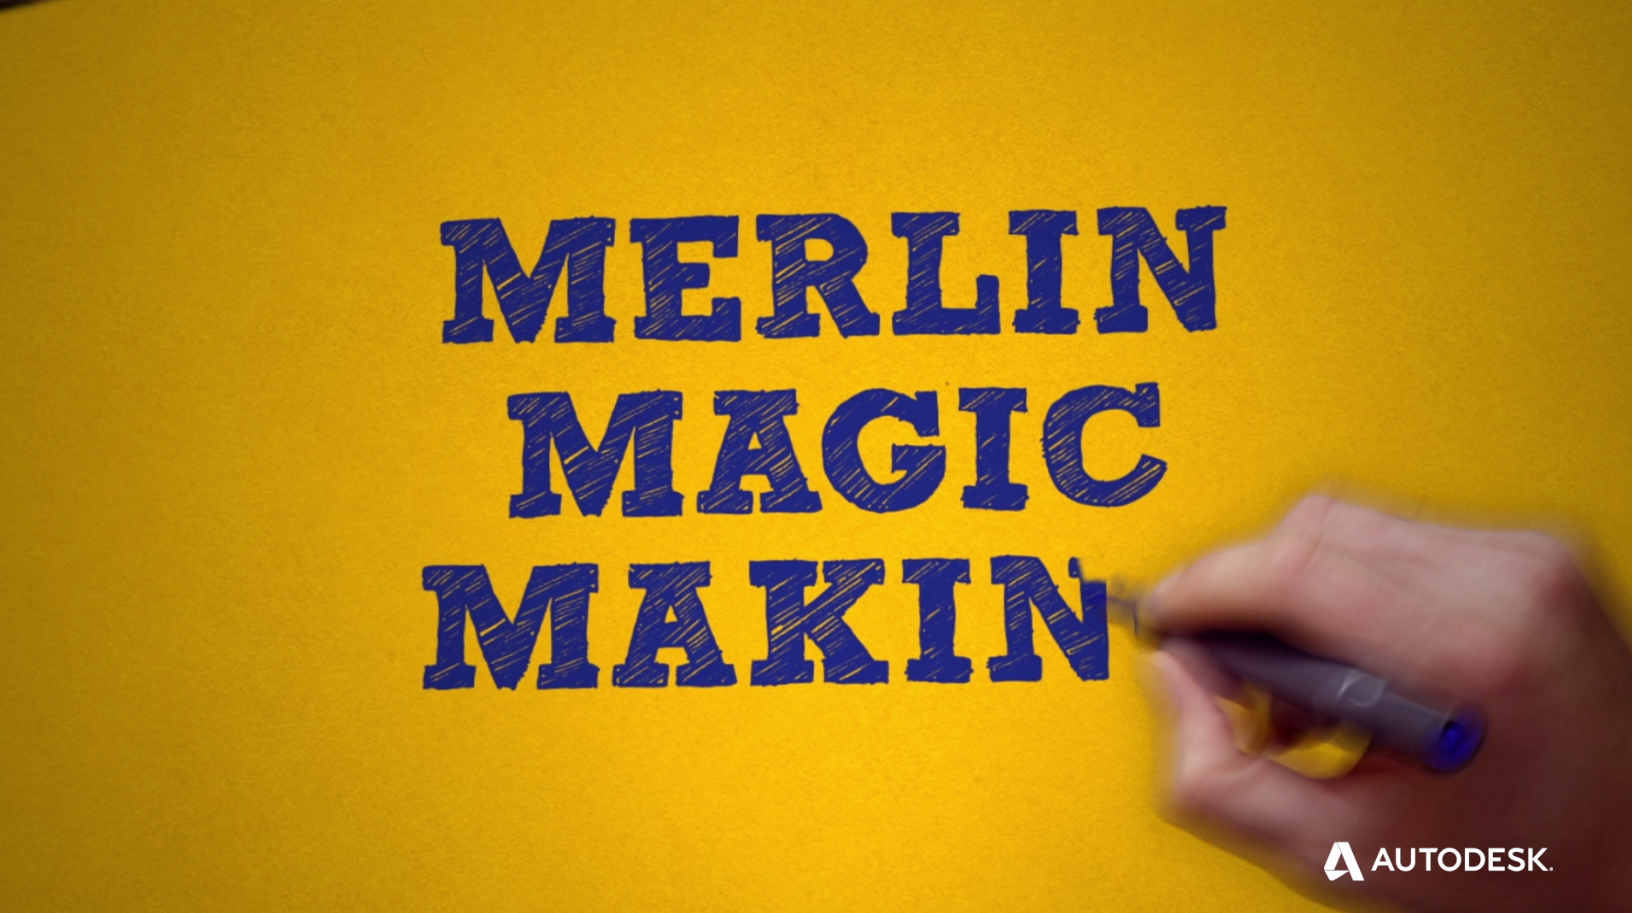 Merlin Magic Makers - Advanced Manufacturing